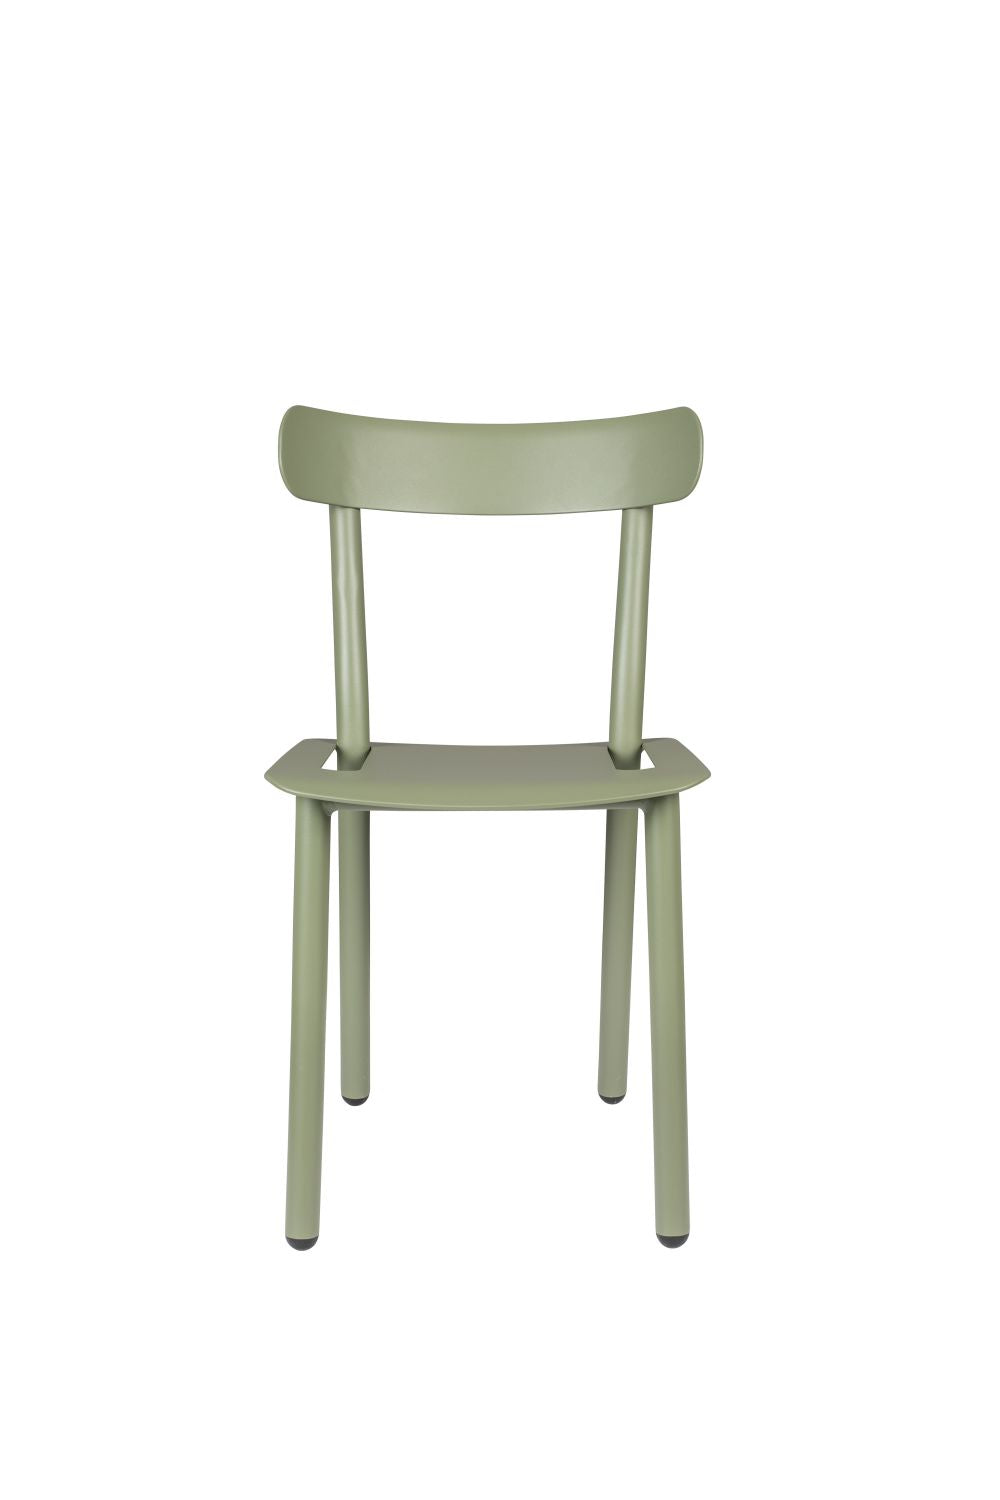  Zuiver-Zuiver Set of 2 Friday Garden Chairs Green-Green 53 